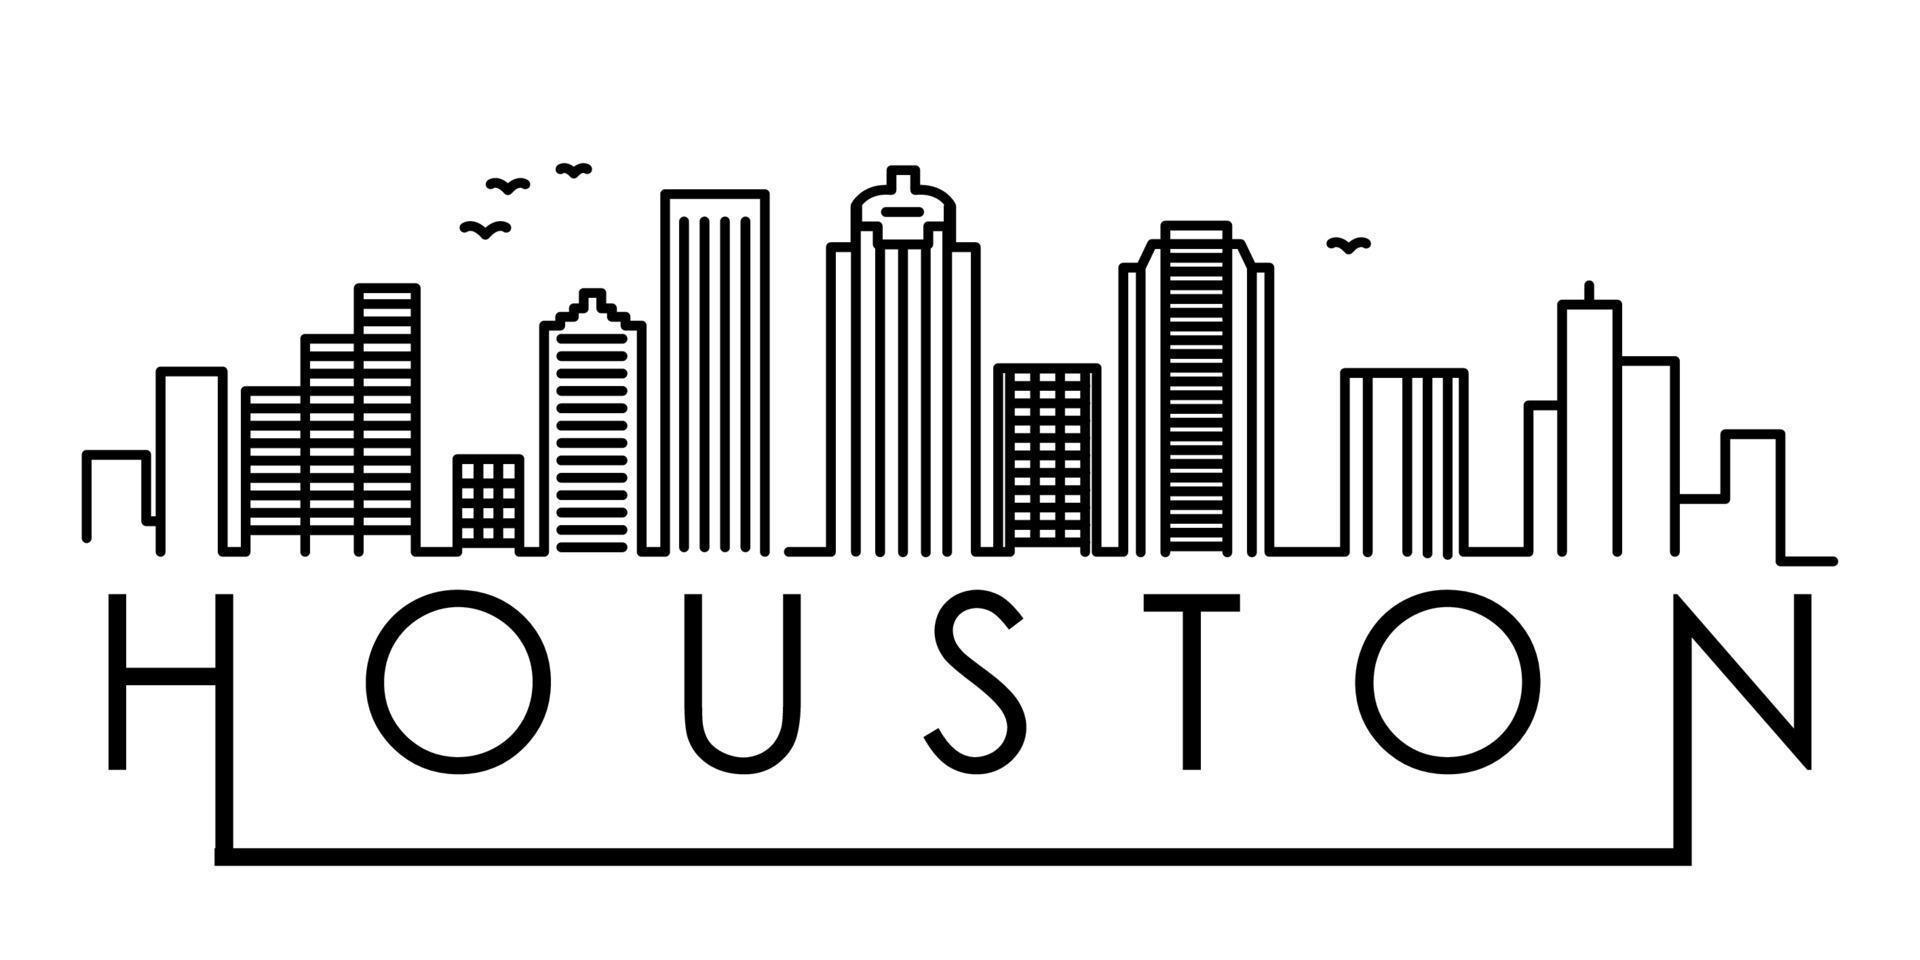 Linear Houston City Silhouette with Typographic Design vector icon